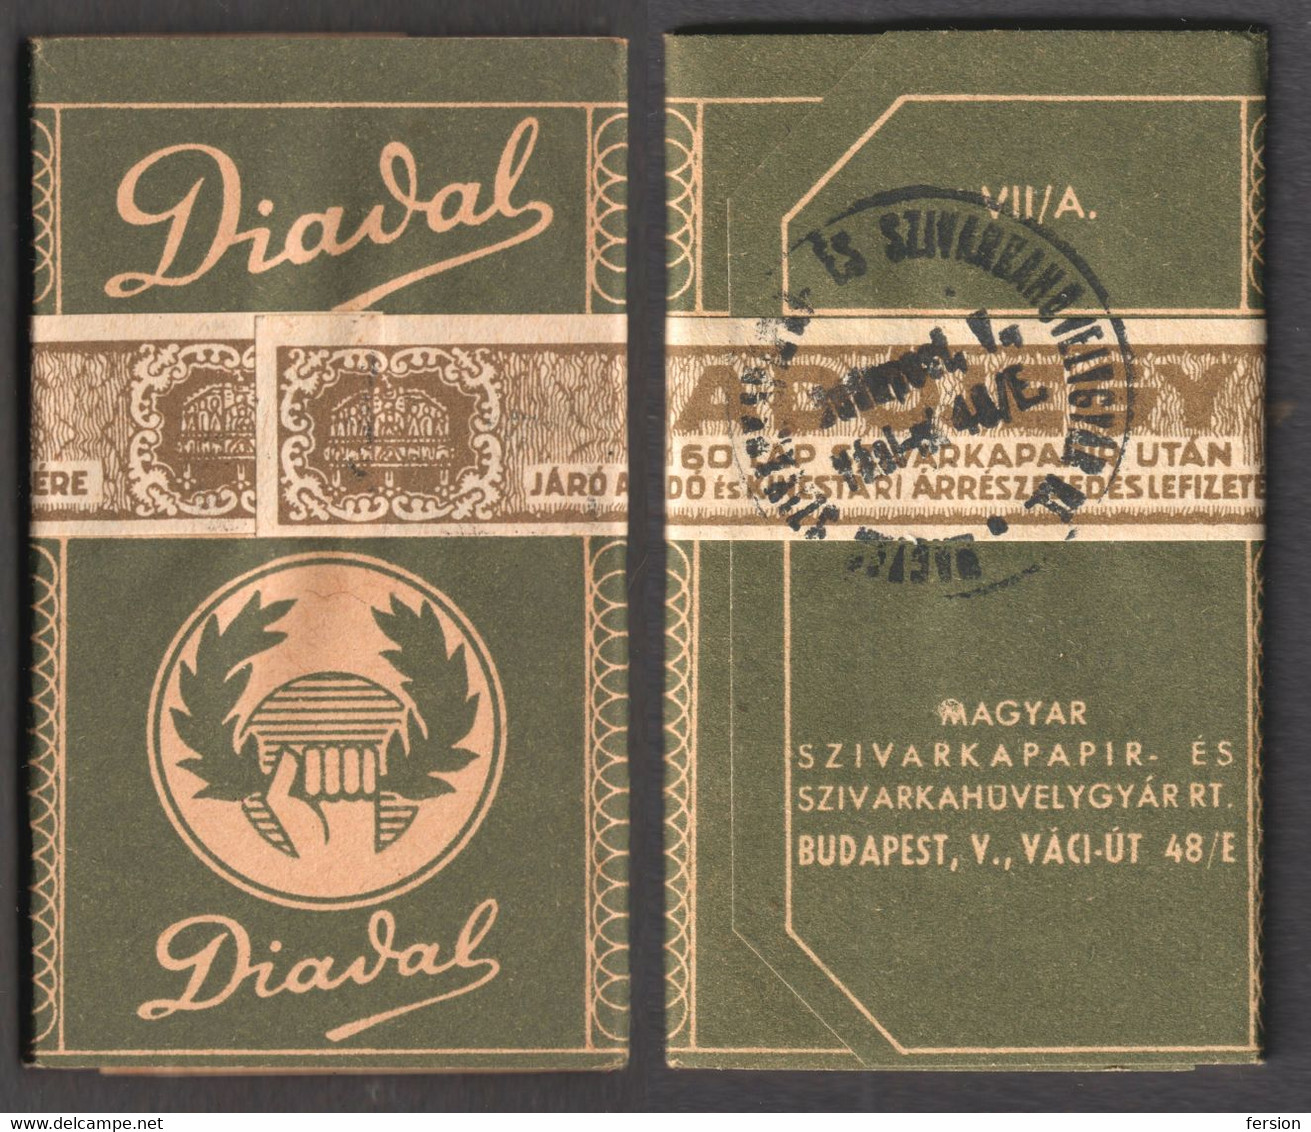 REVENUE Seal Fiscal Tax Stripe Hungary CIGARETTE TOBACCO Paper Package LABEL Cover DIADAL VICTORY 1930 UNUSED Full Paper - Fiscale Zegels